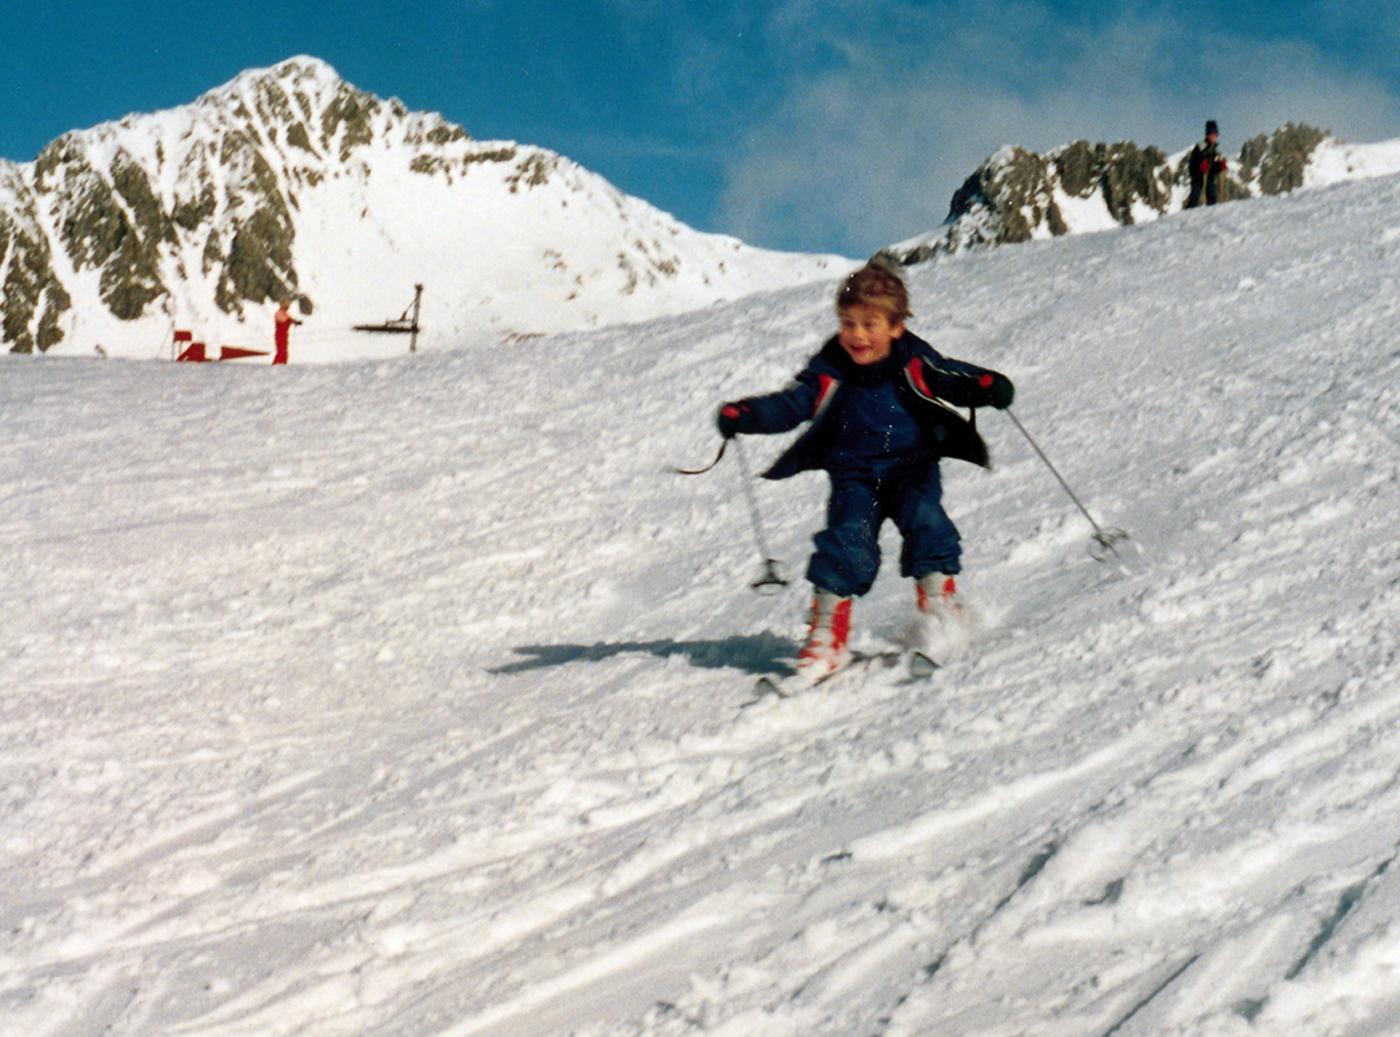 Small child skiing down snowy slopw